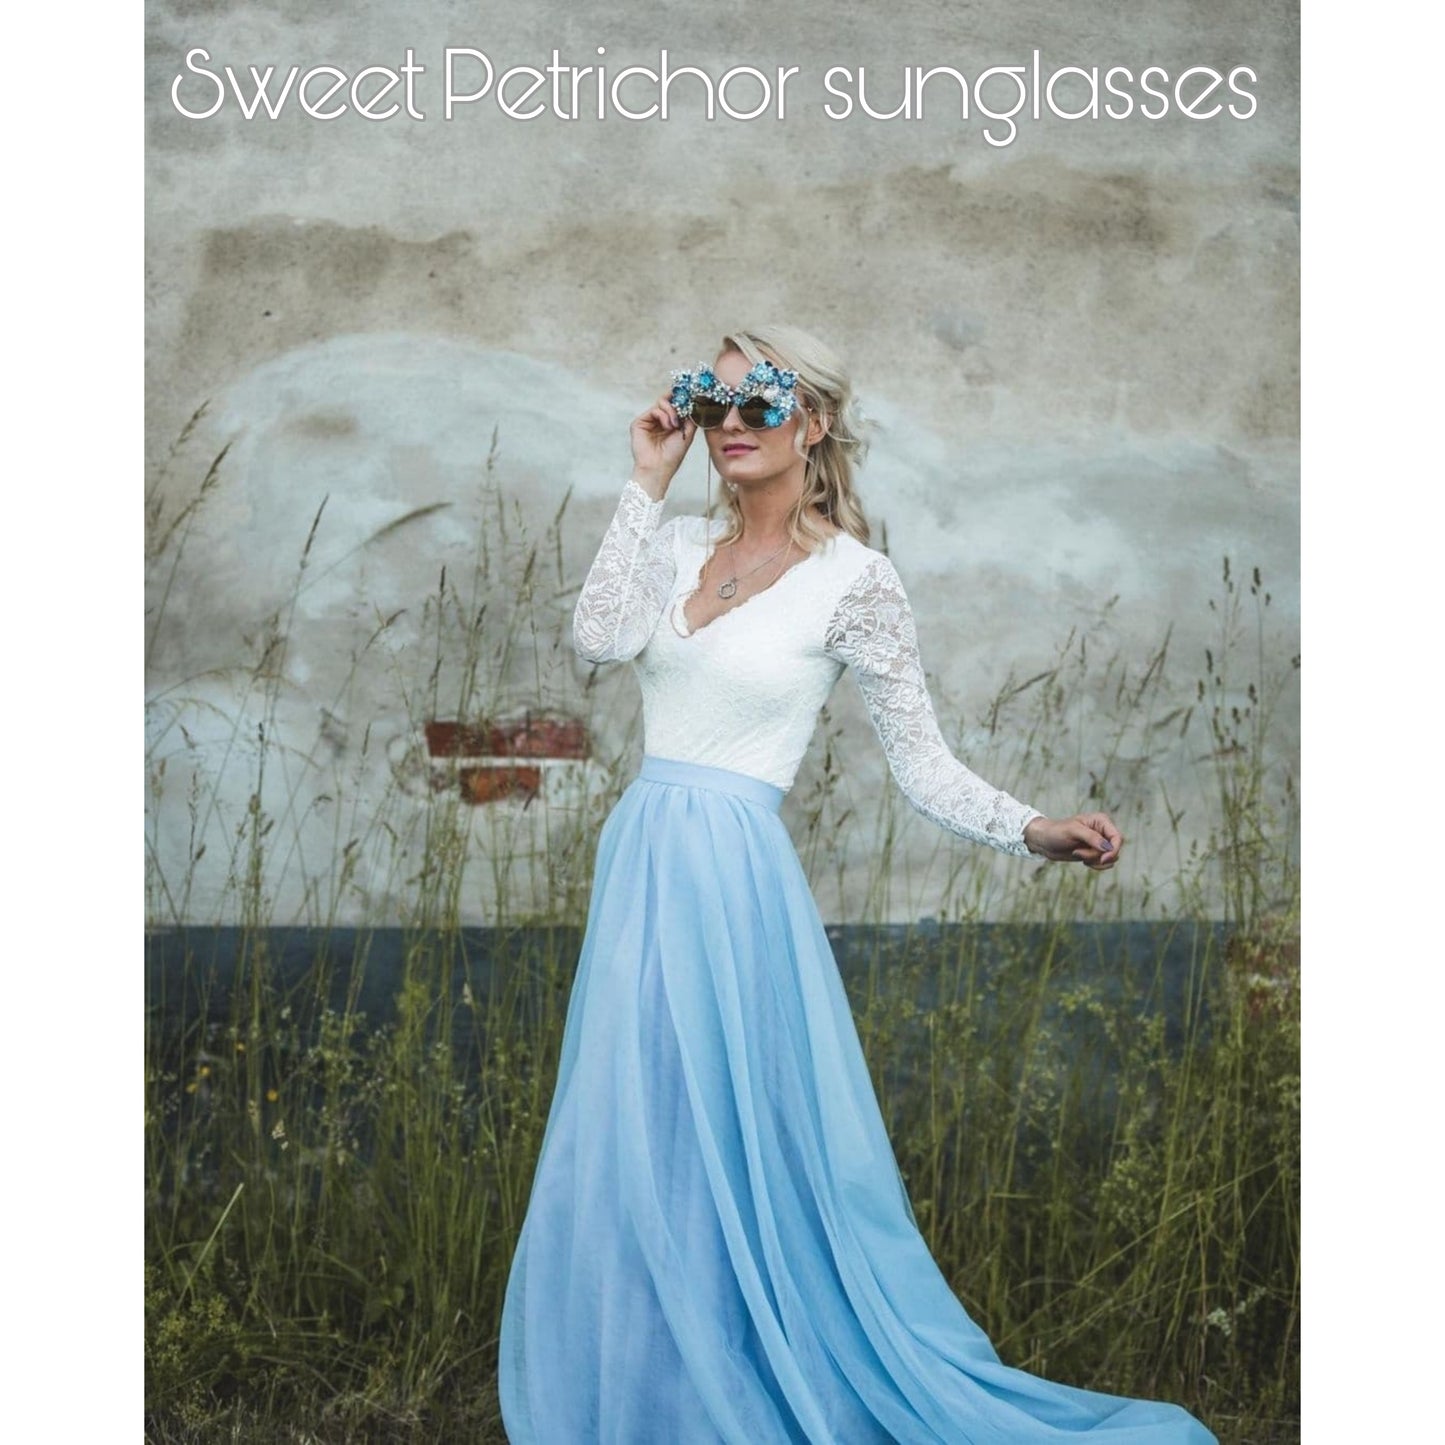 The Sweet Petrichor couture sunglasses